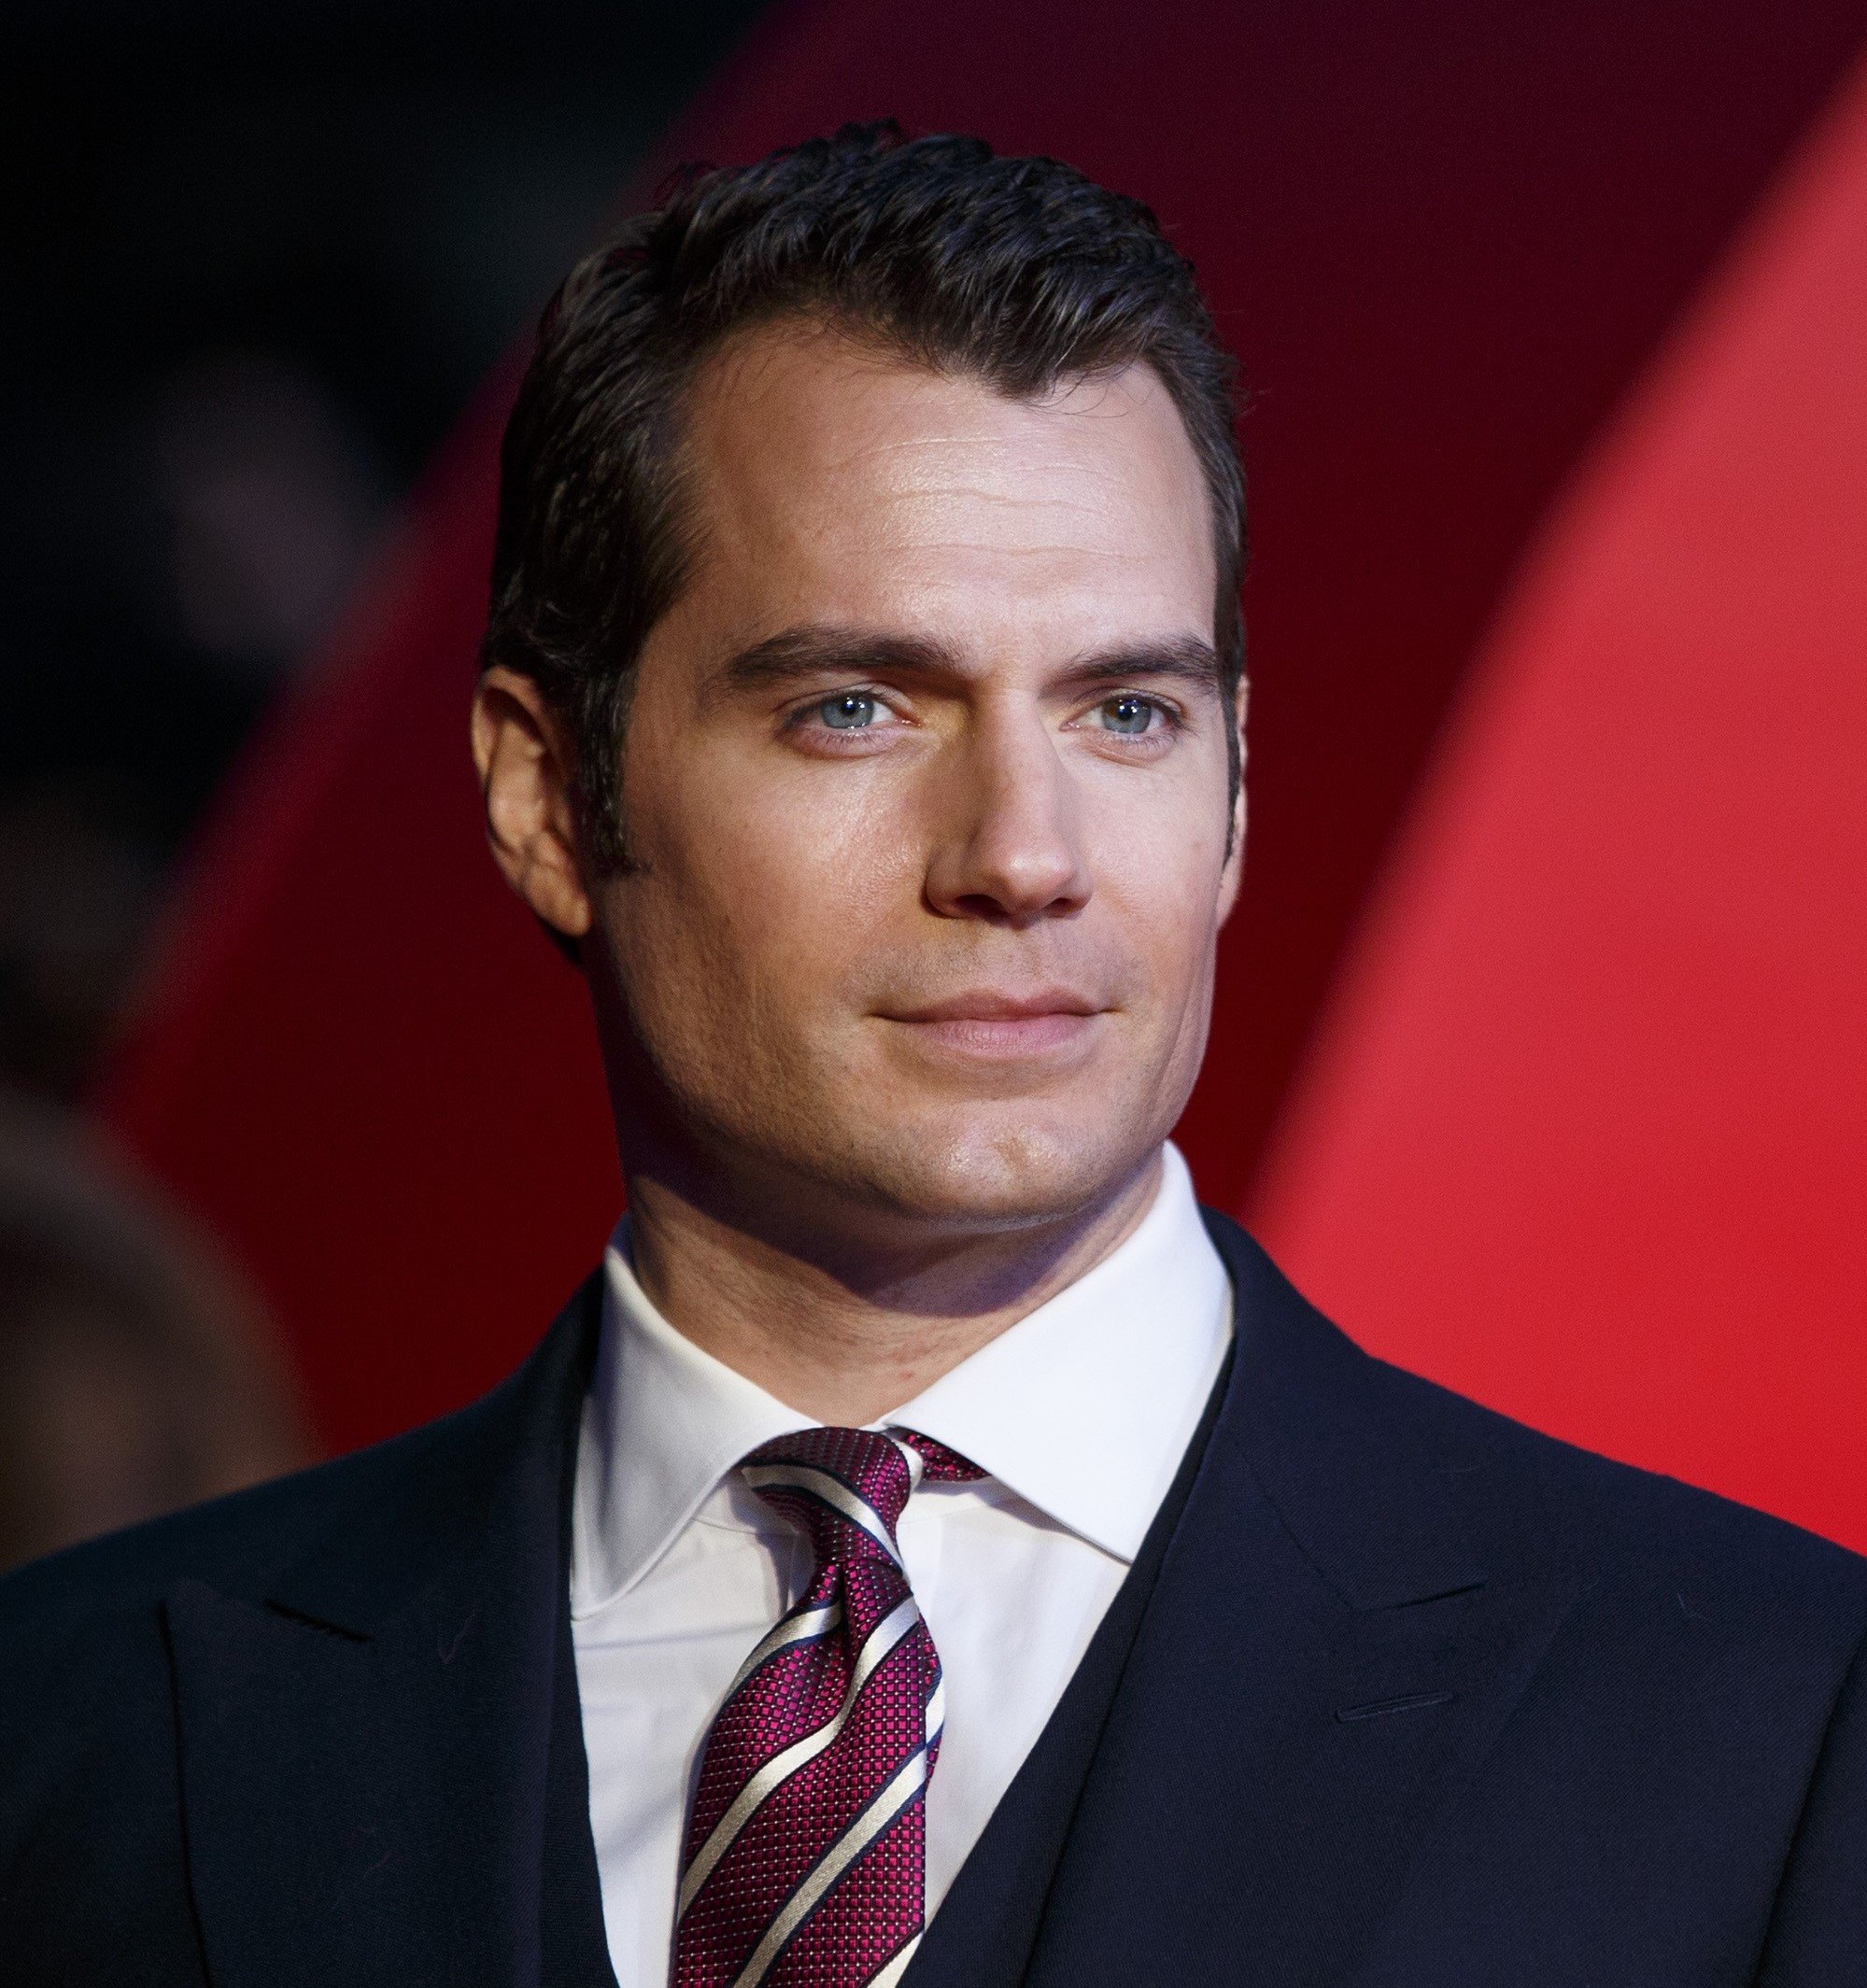 enry Cavill at the 'Batman v Superman: Dawn of Justice' European Premiere in London, in 2016. | Source: Getty Images